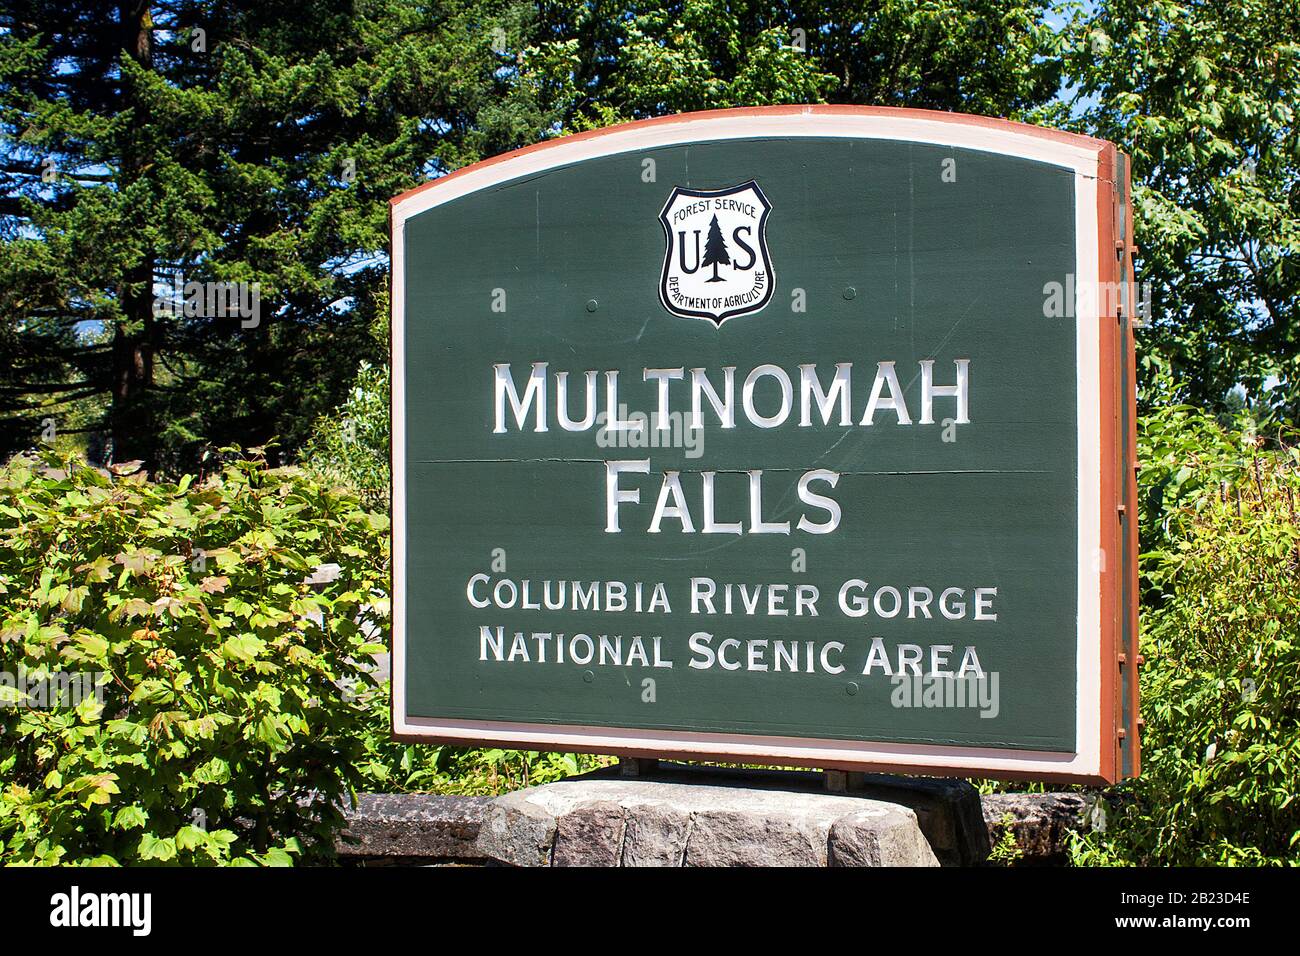 Oregon, USA: Welcome sign of Multnomah Falls Columbia River Gorge National Scenic Area Stock Photo